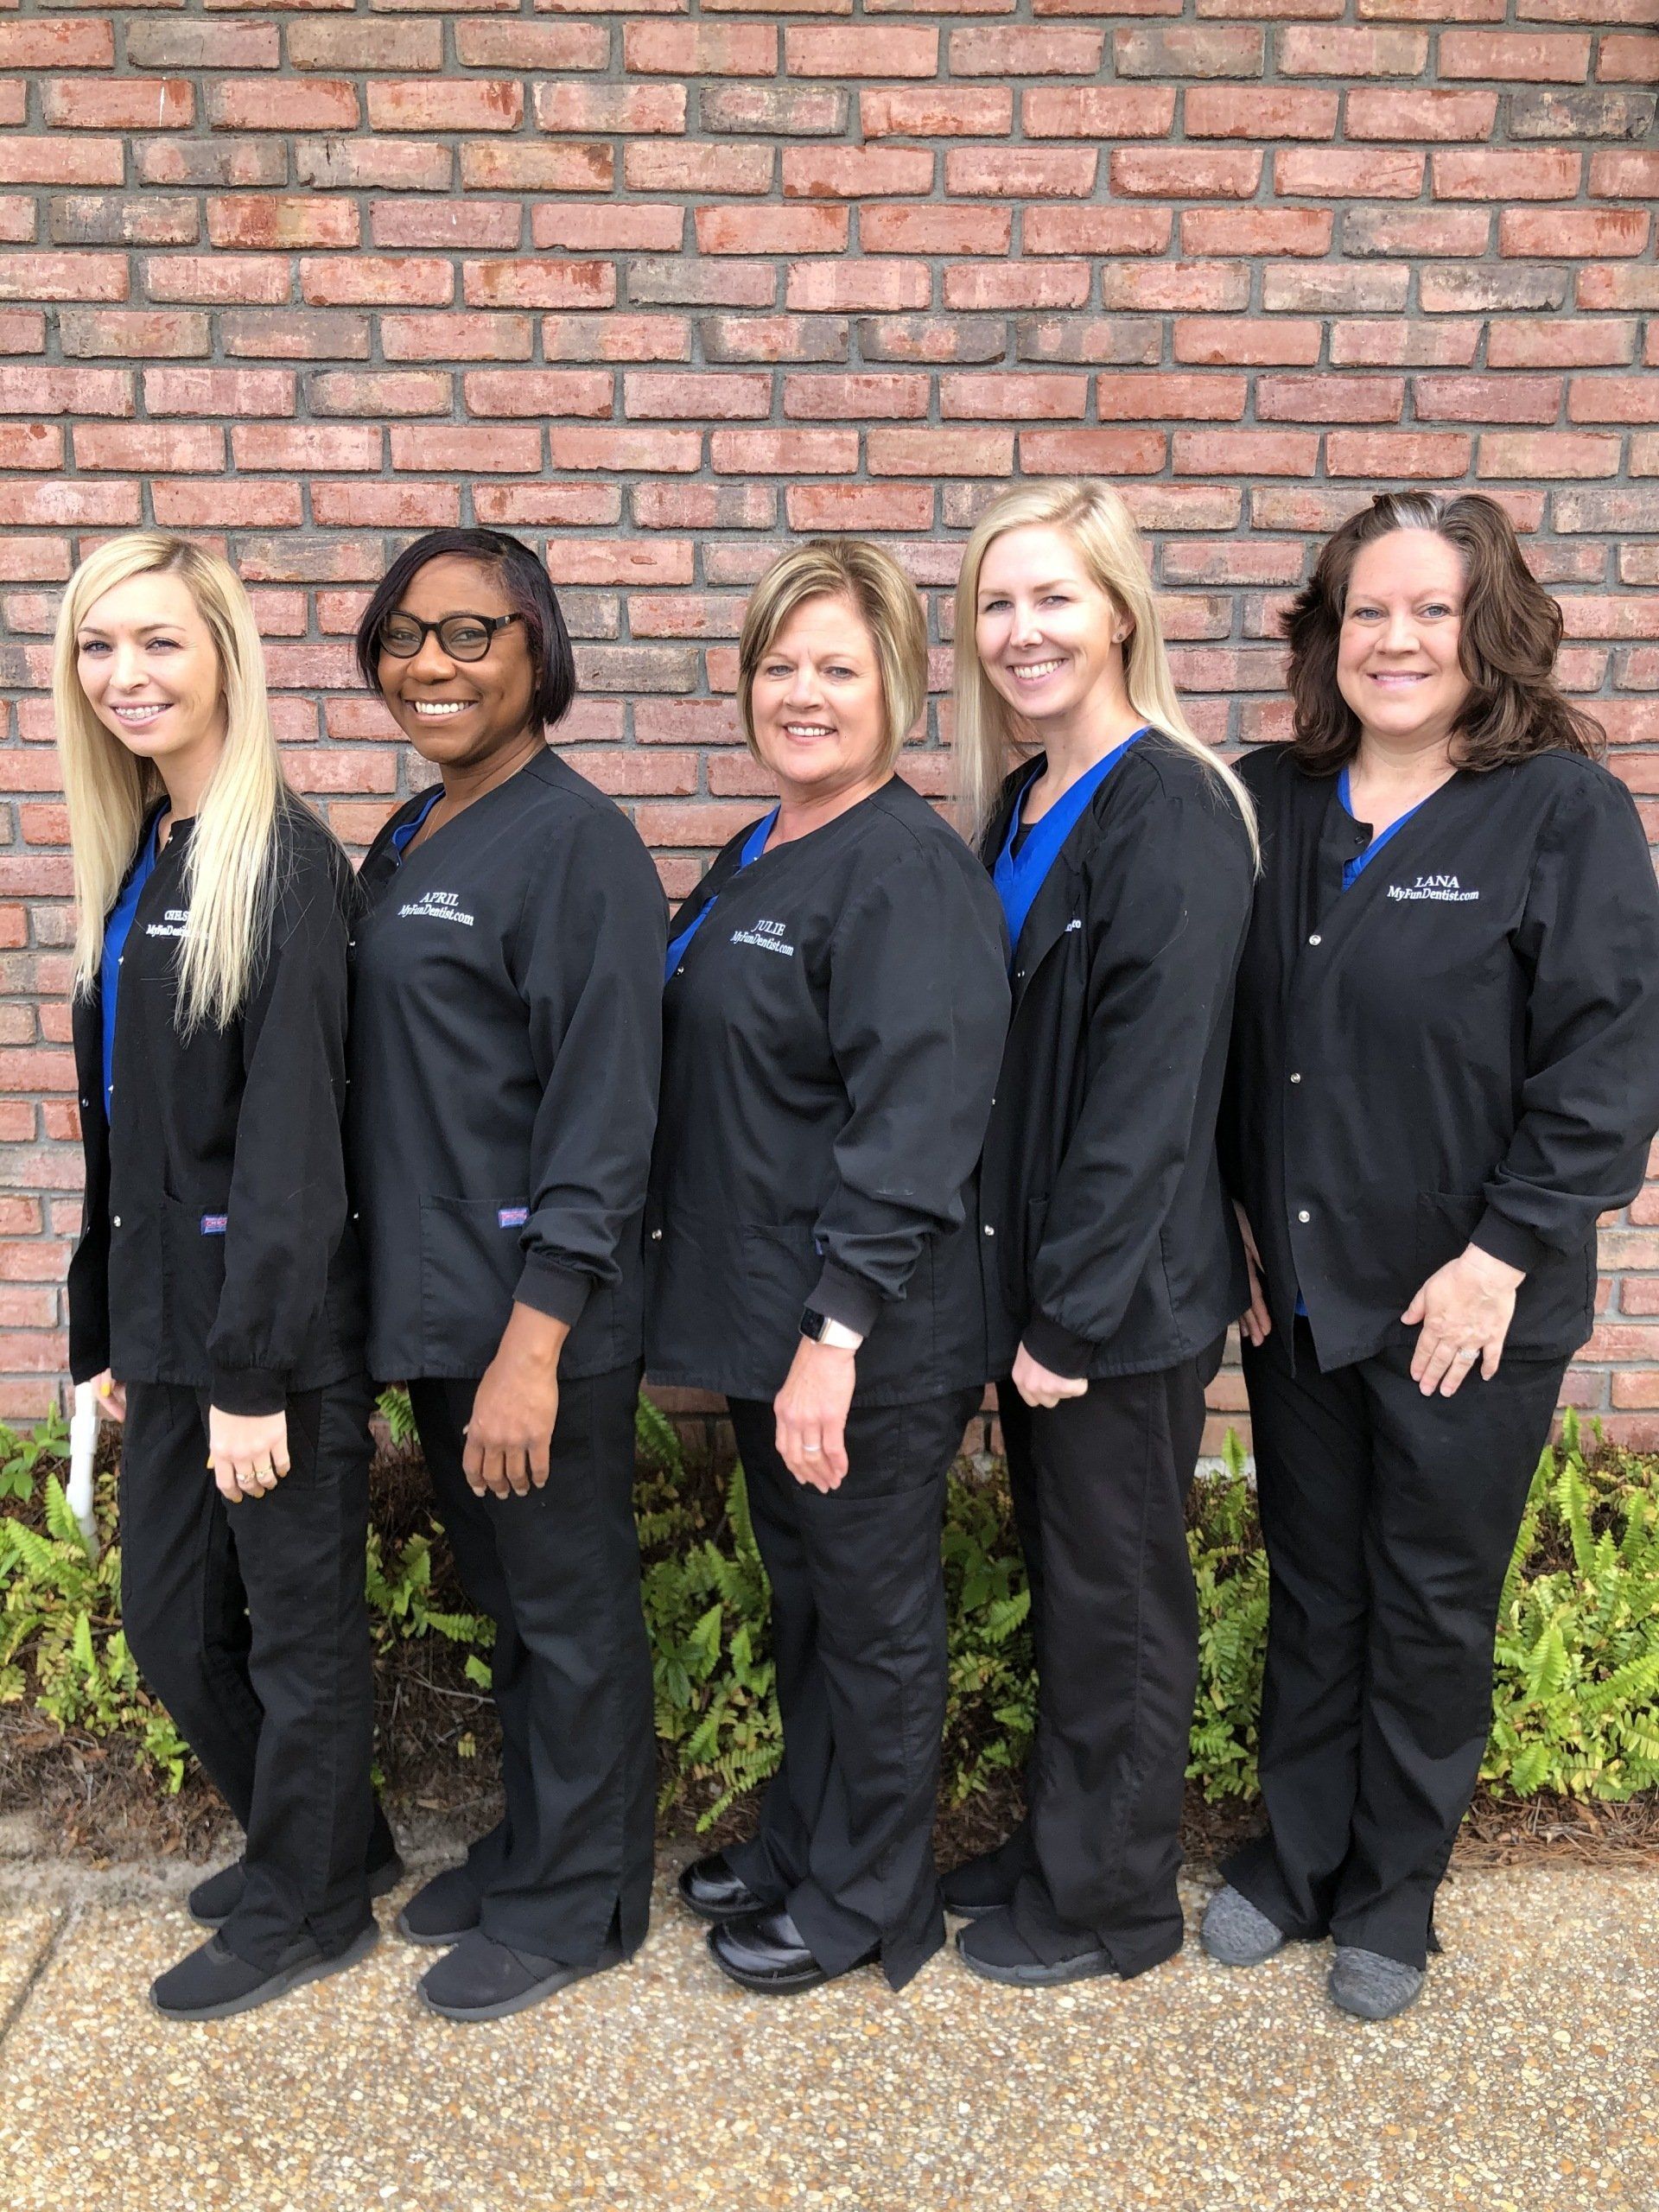 Veneers — Staff of Personal Attention Dental Center in Panama City, FL